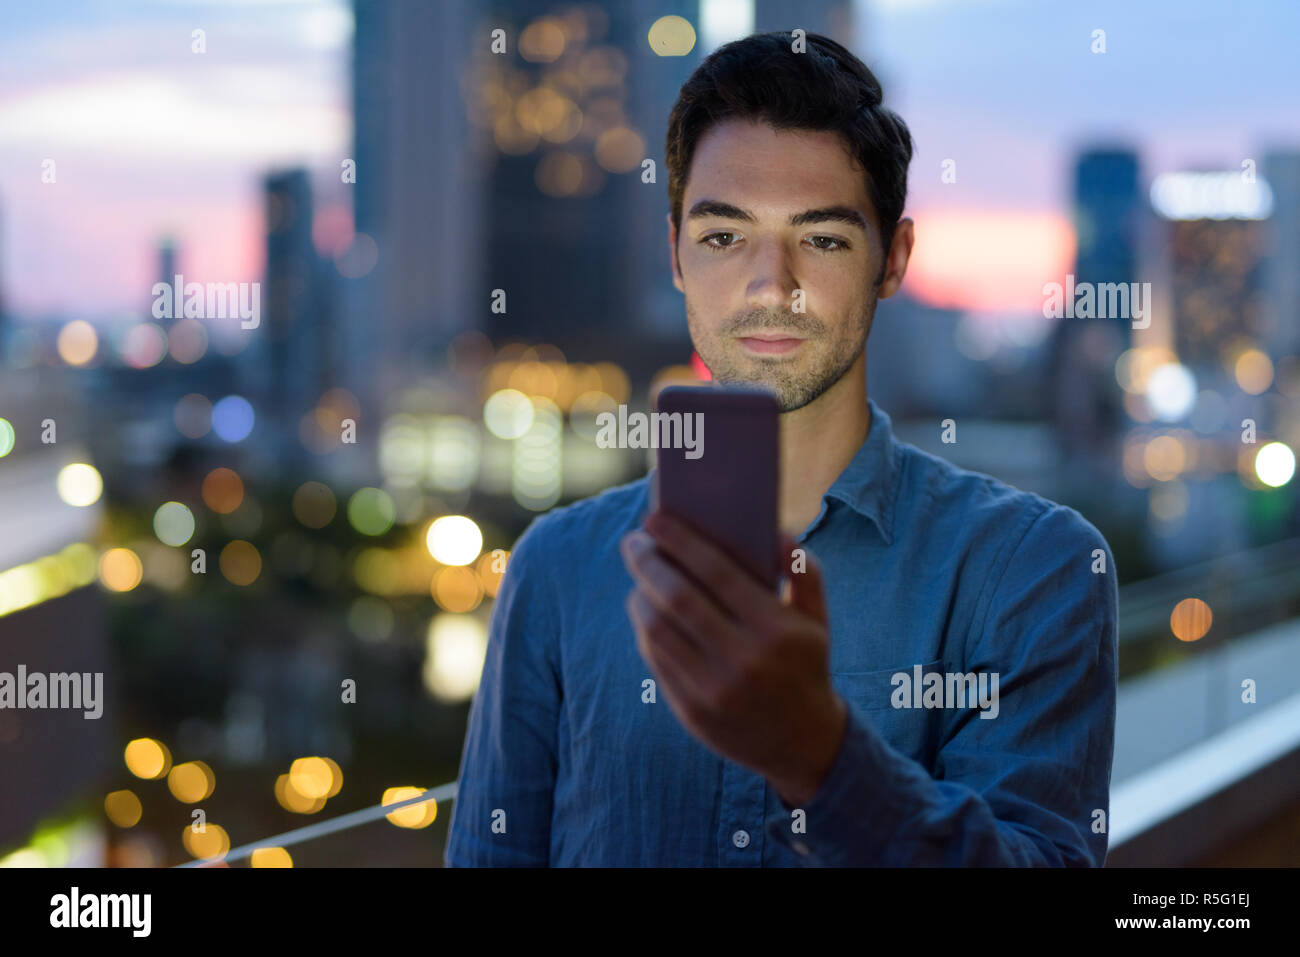 Portrait of man outdoors at night in city using mobile phone Stock Photo